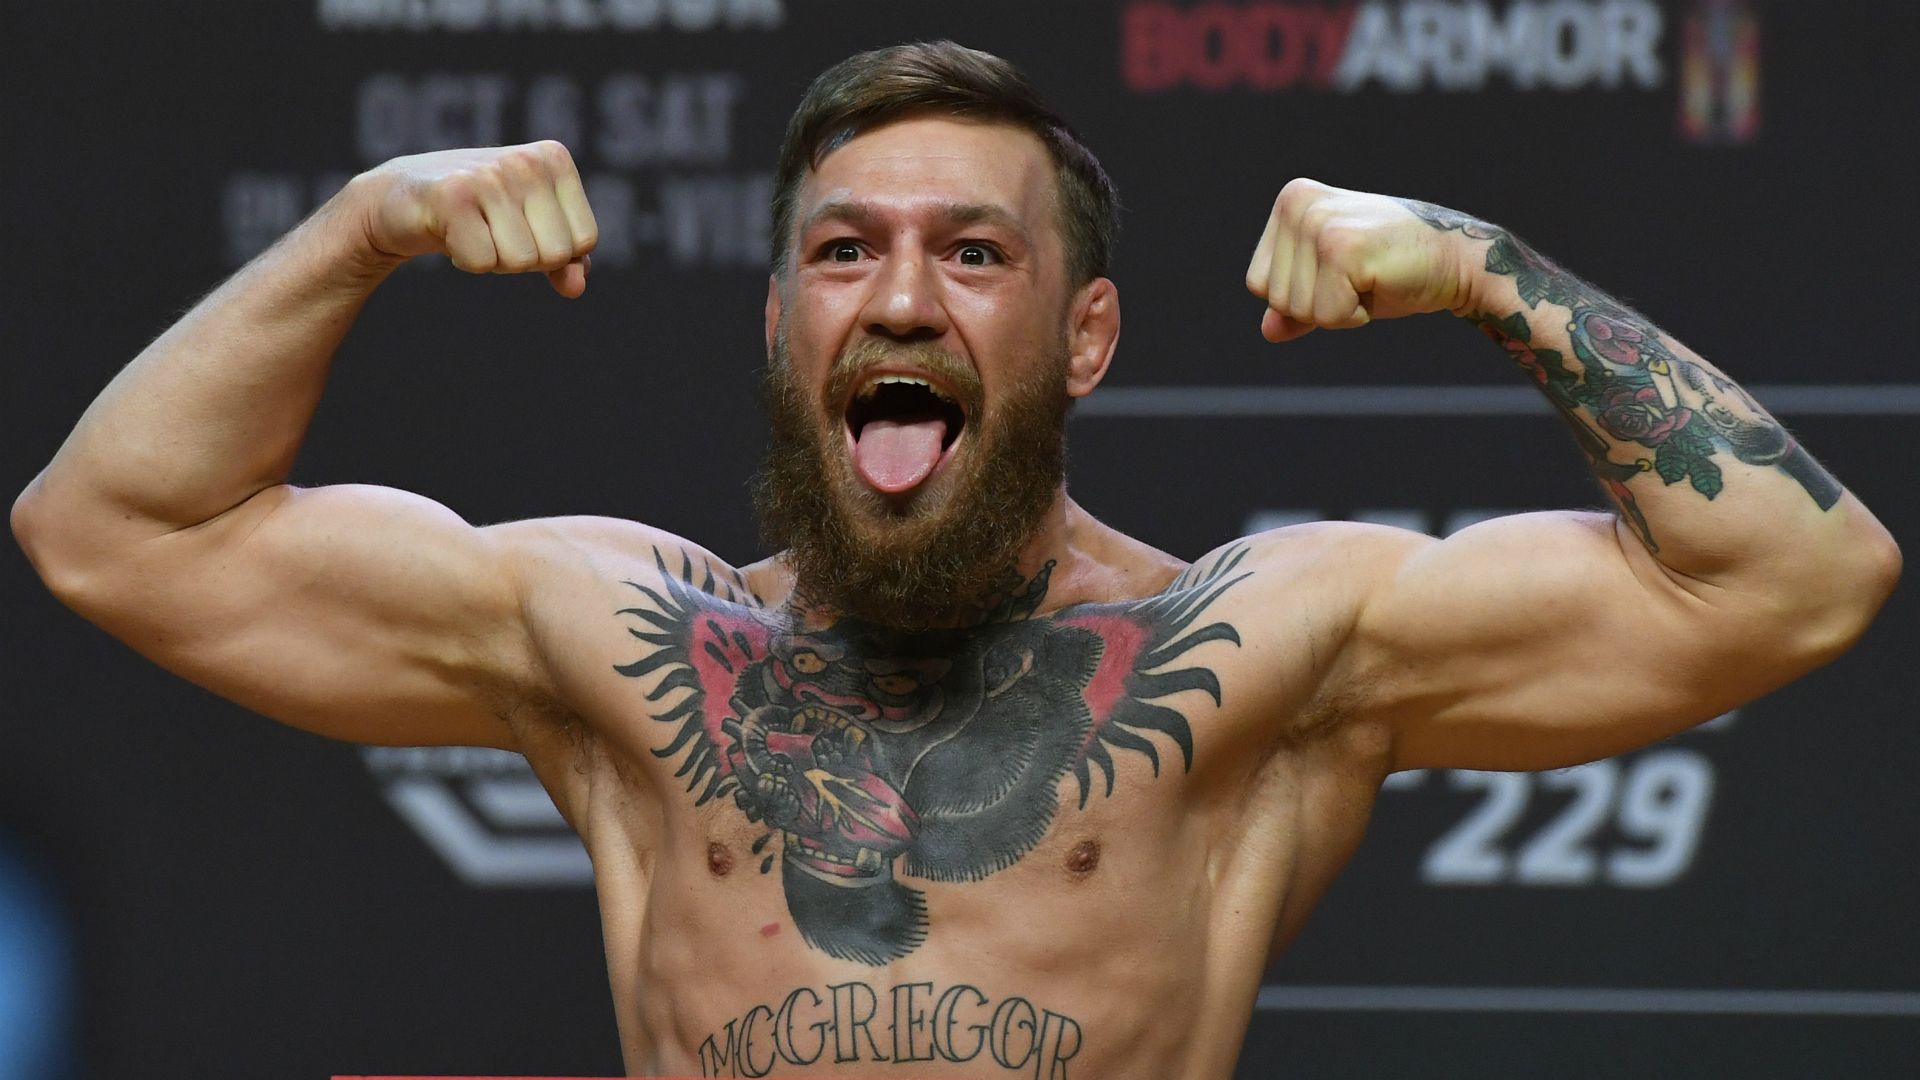 What time is Conor McGregor's fight tonight? UFC 246 schedule